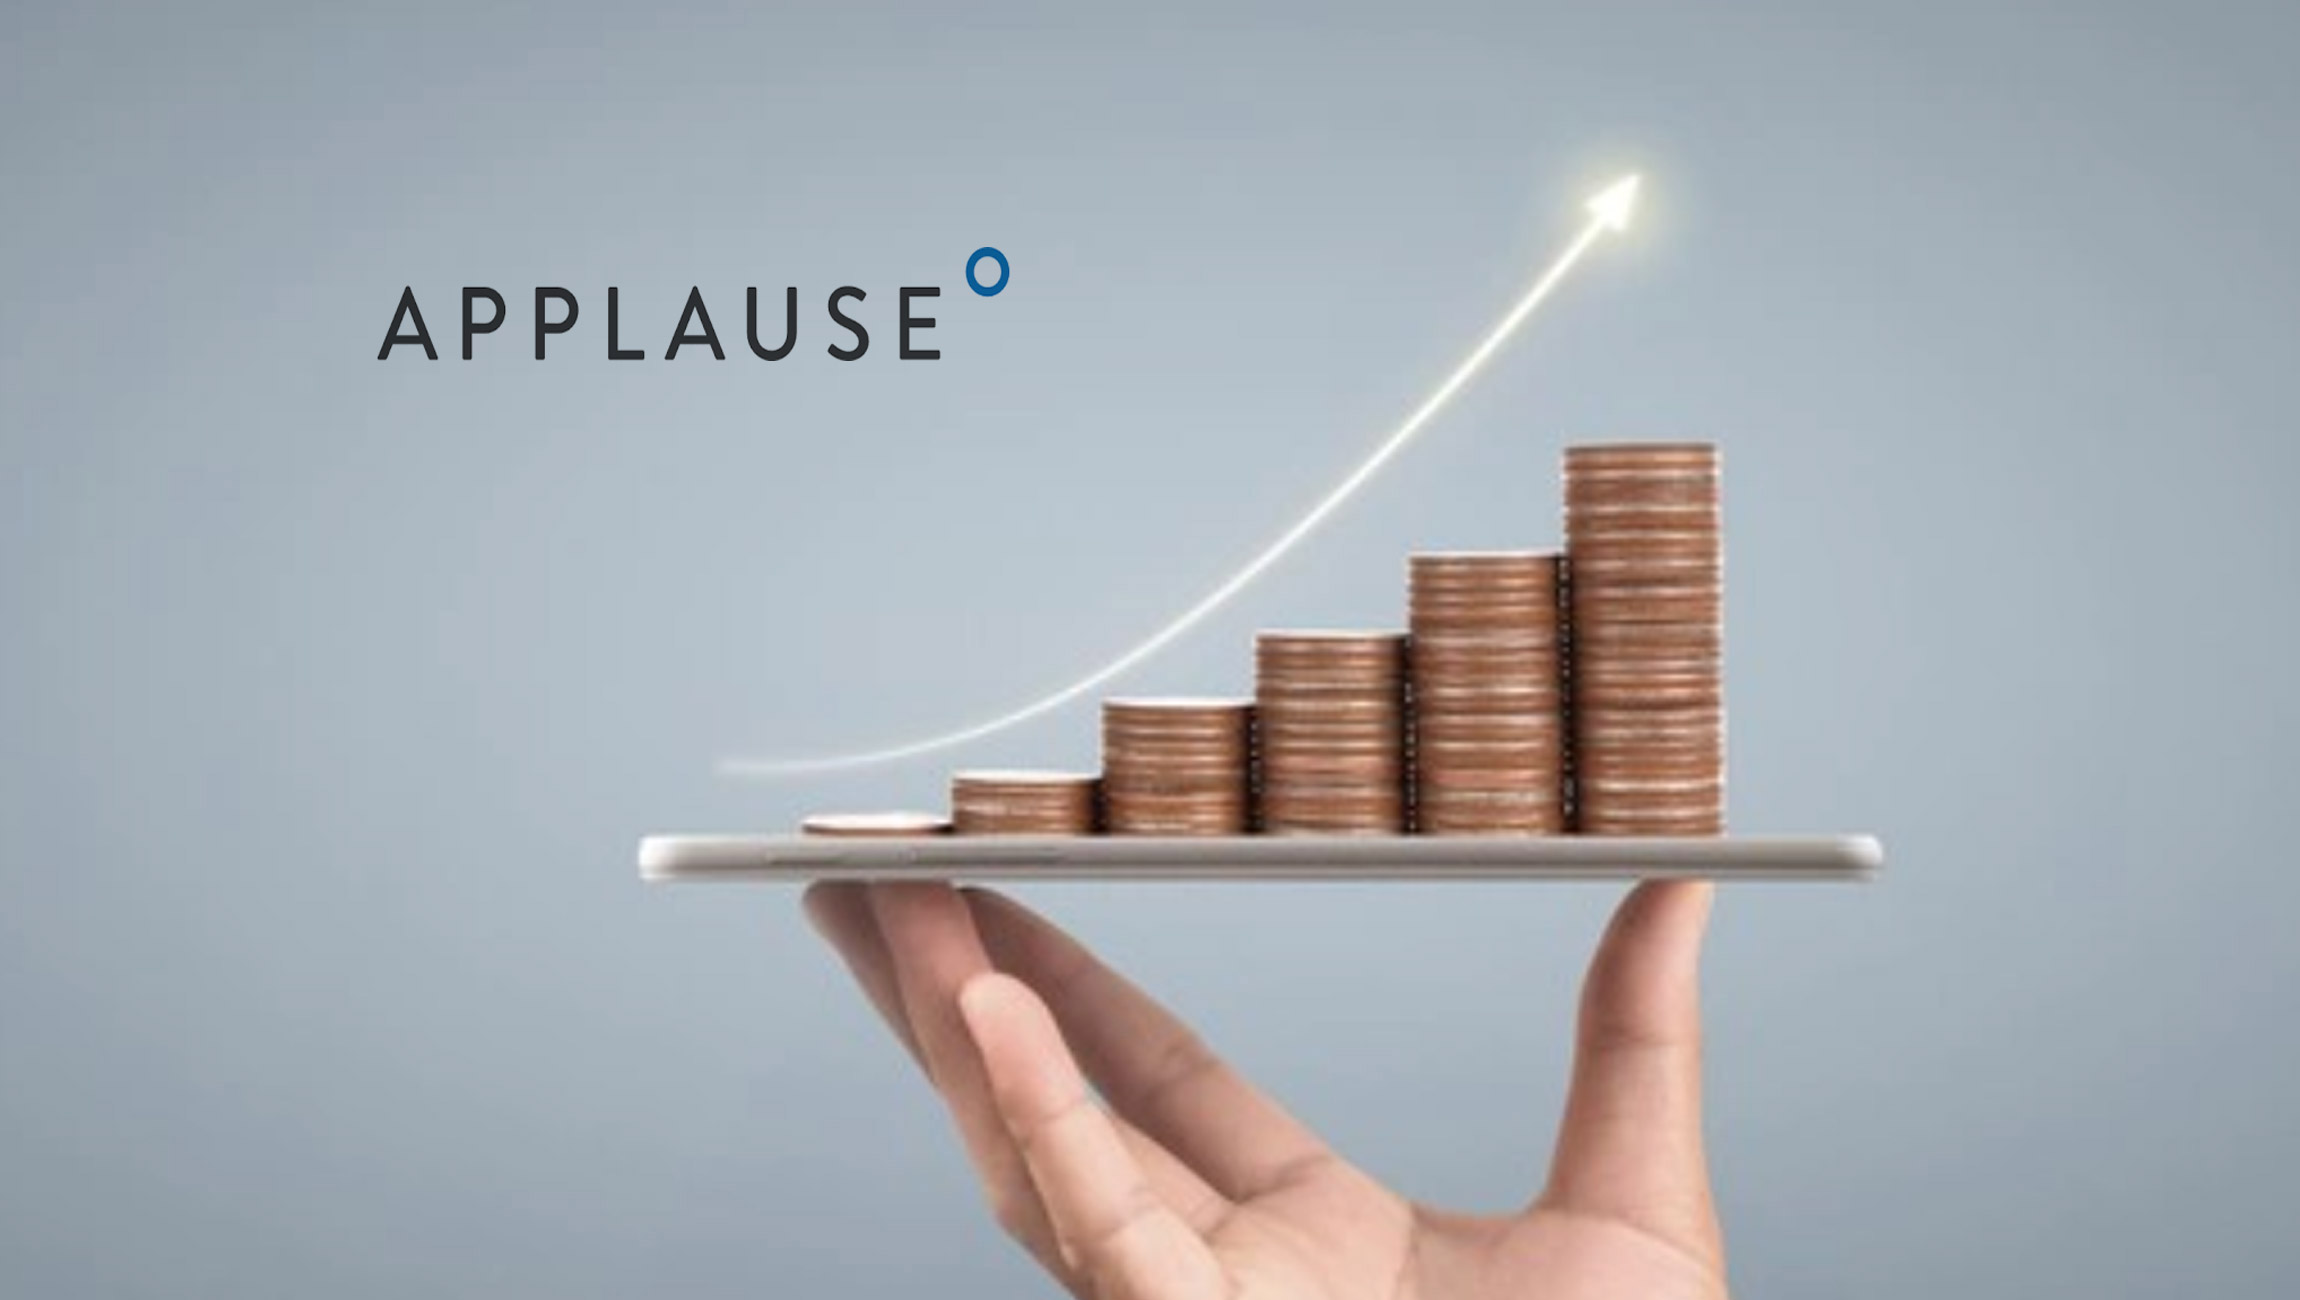 Applause-Delivers-Record-Breaking-Year_-Surpassing-_150-Million-in-Annualized-Recurring-Revenue-as-Momentum-for-Testing-and-Digital-Quality-Accelerates-Worldwide